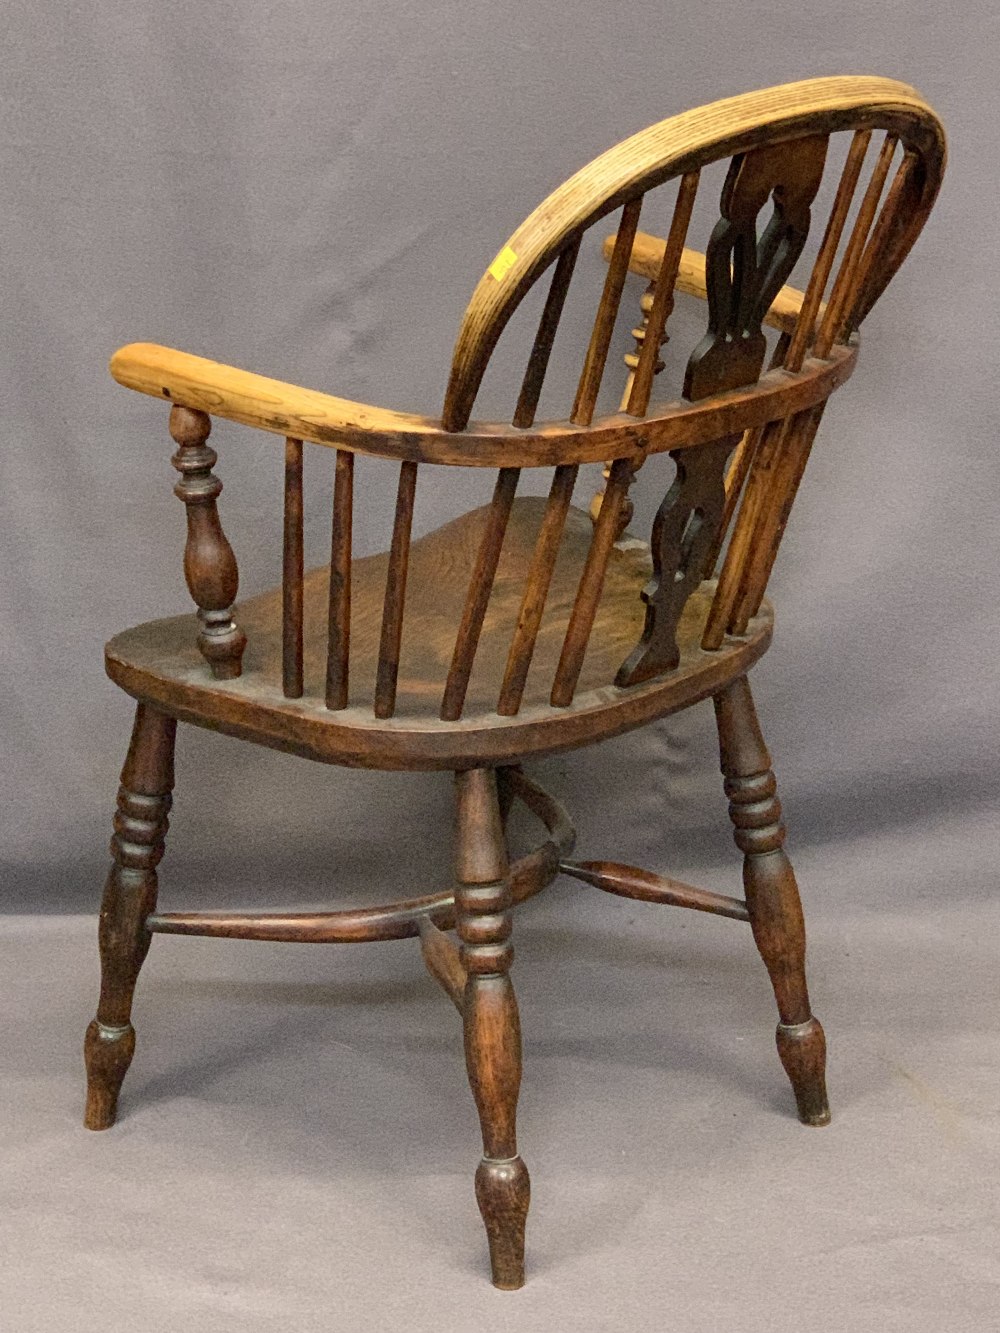 CIRCA 1840 ASH & ELM WINDSOR ARMCHAIR with crinoline stretcher, good warm colour and wear having a - Image 3 of 3